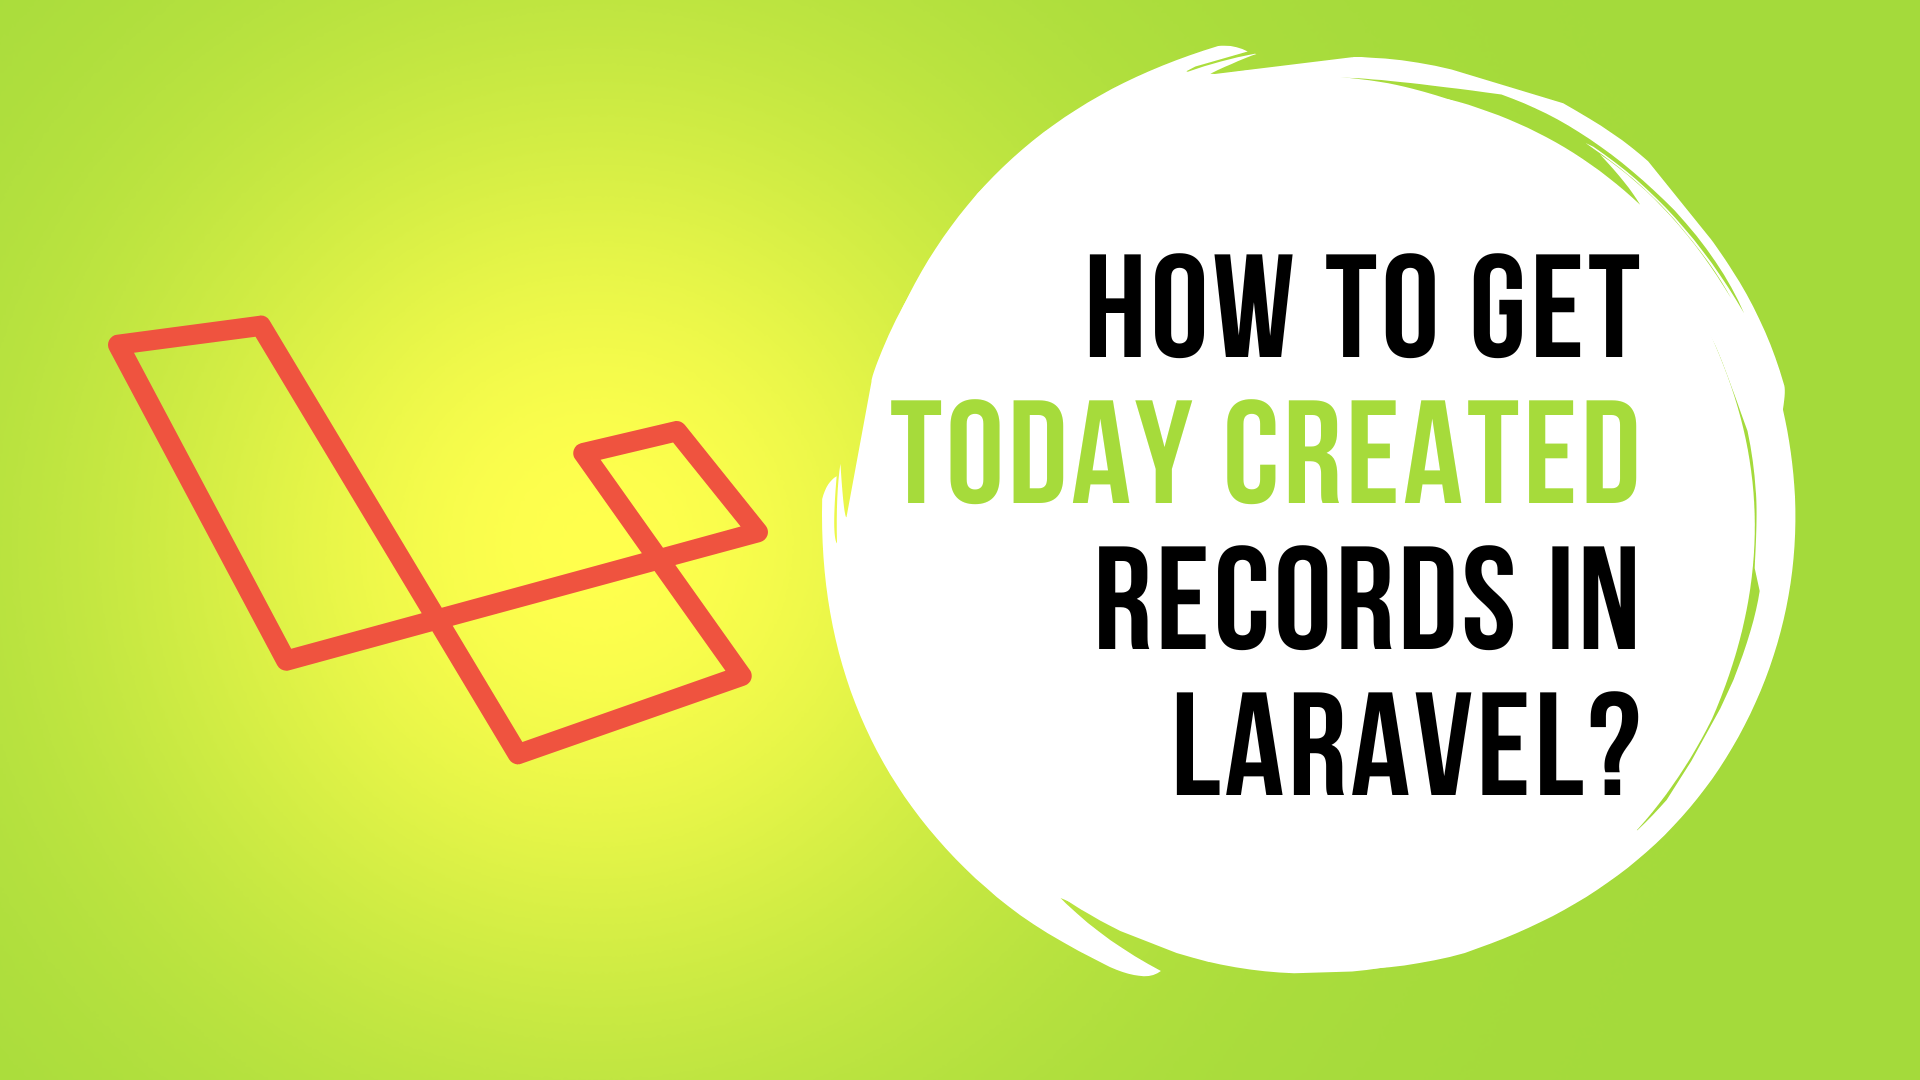 How to Get Today Created Records in Laravel?